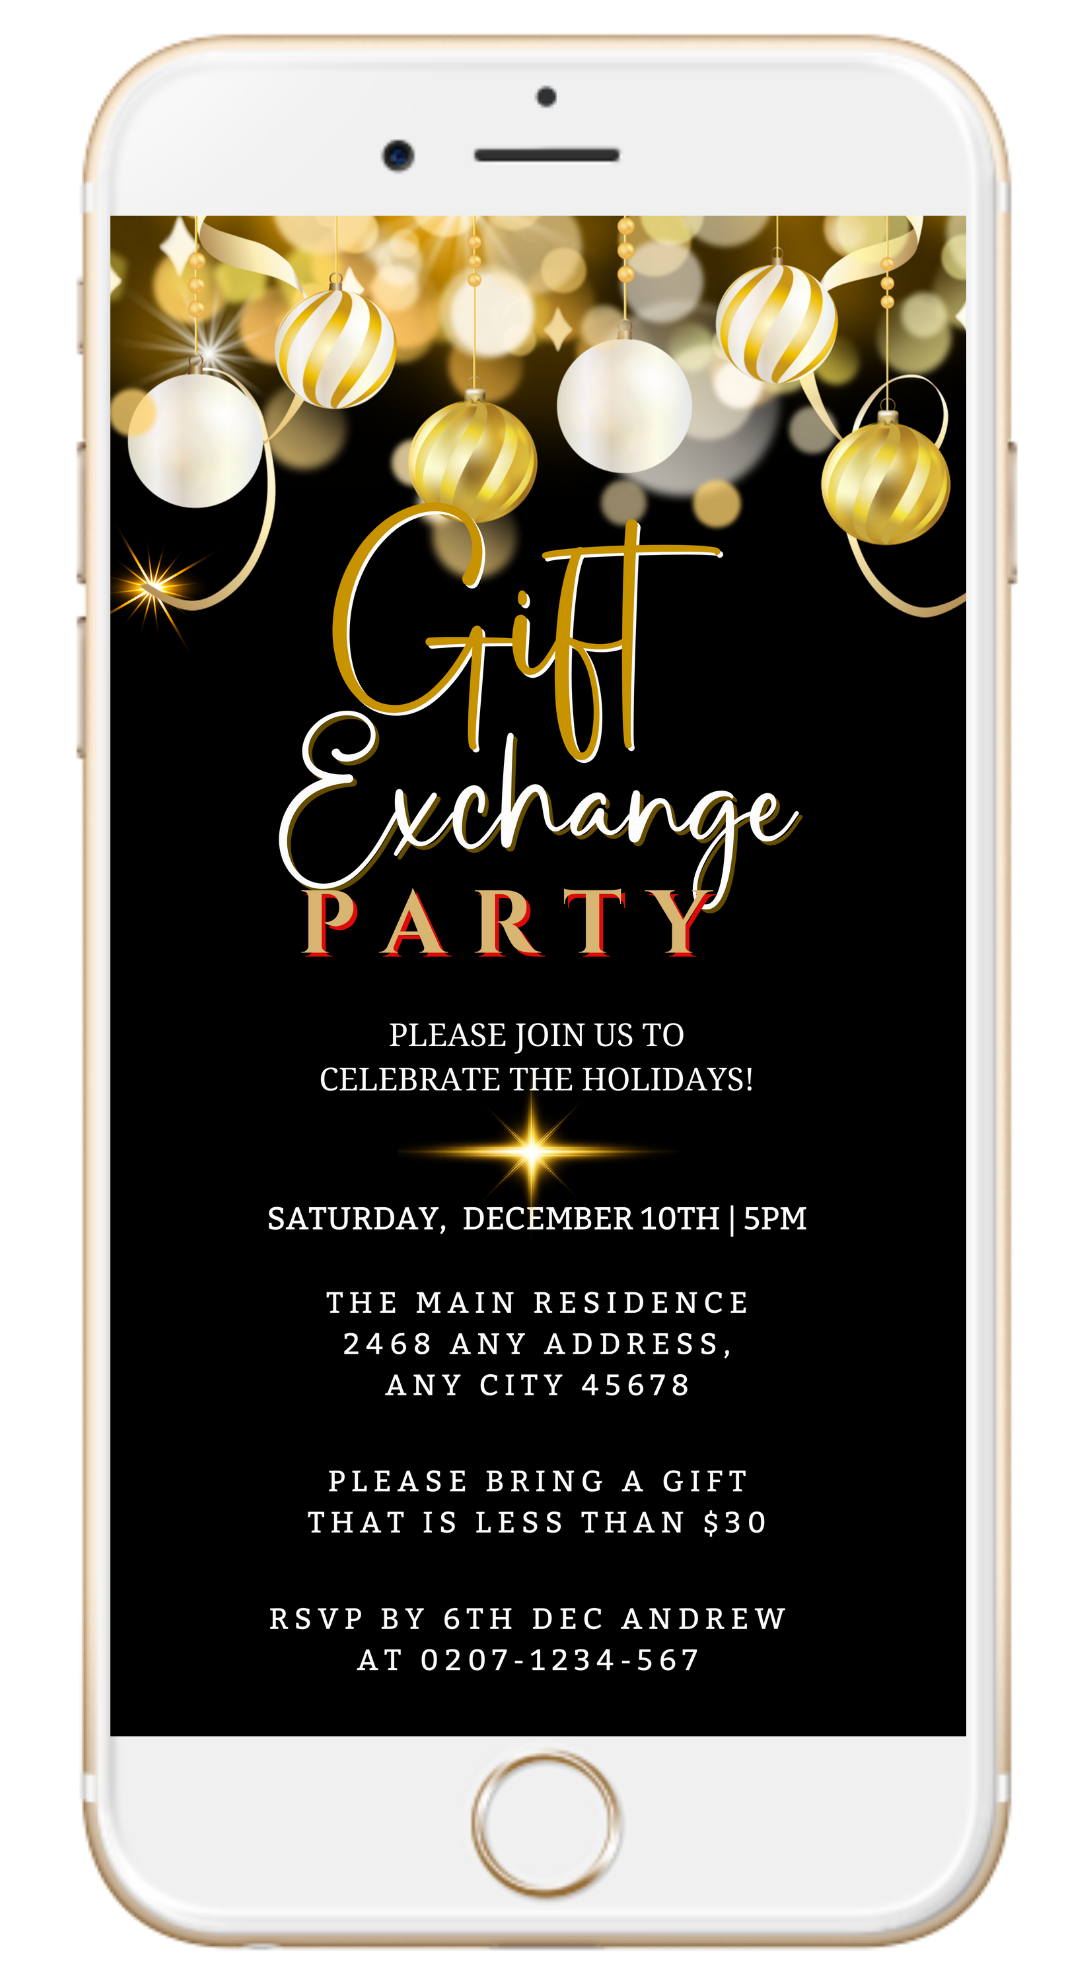 Editable digital invitation for a Christmas party with gold text on a black background, featuring white and gold ornaments. Customizable via Canva for smartphones.